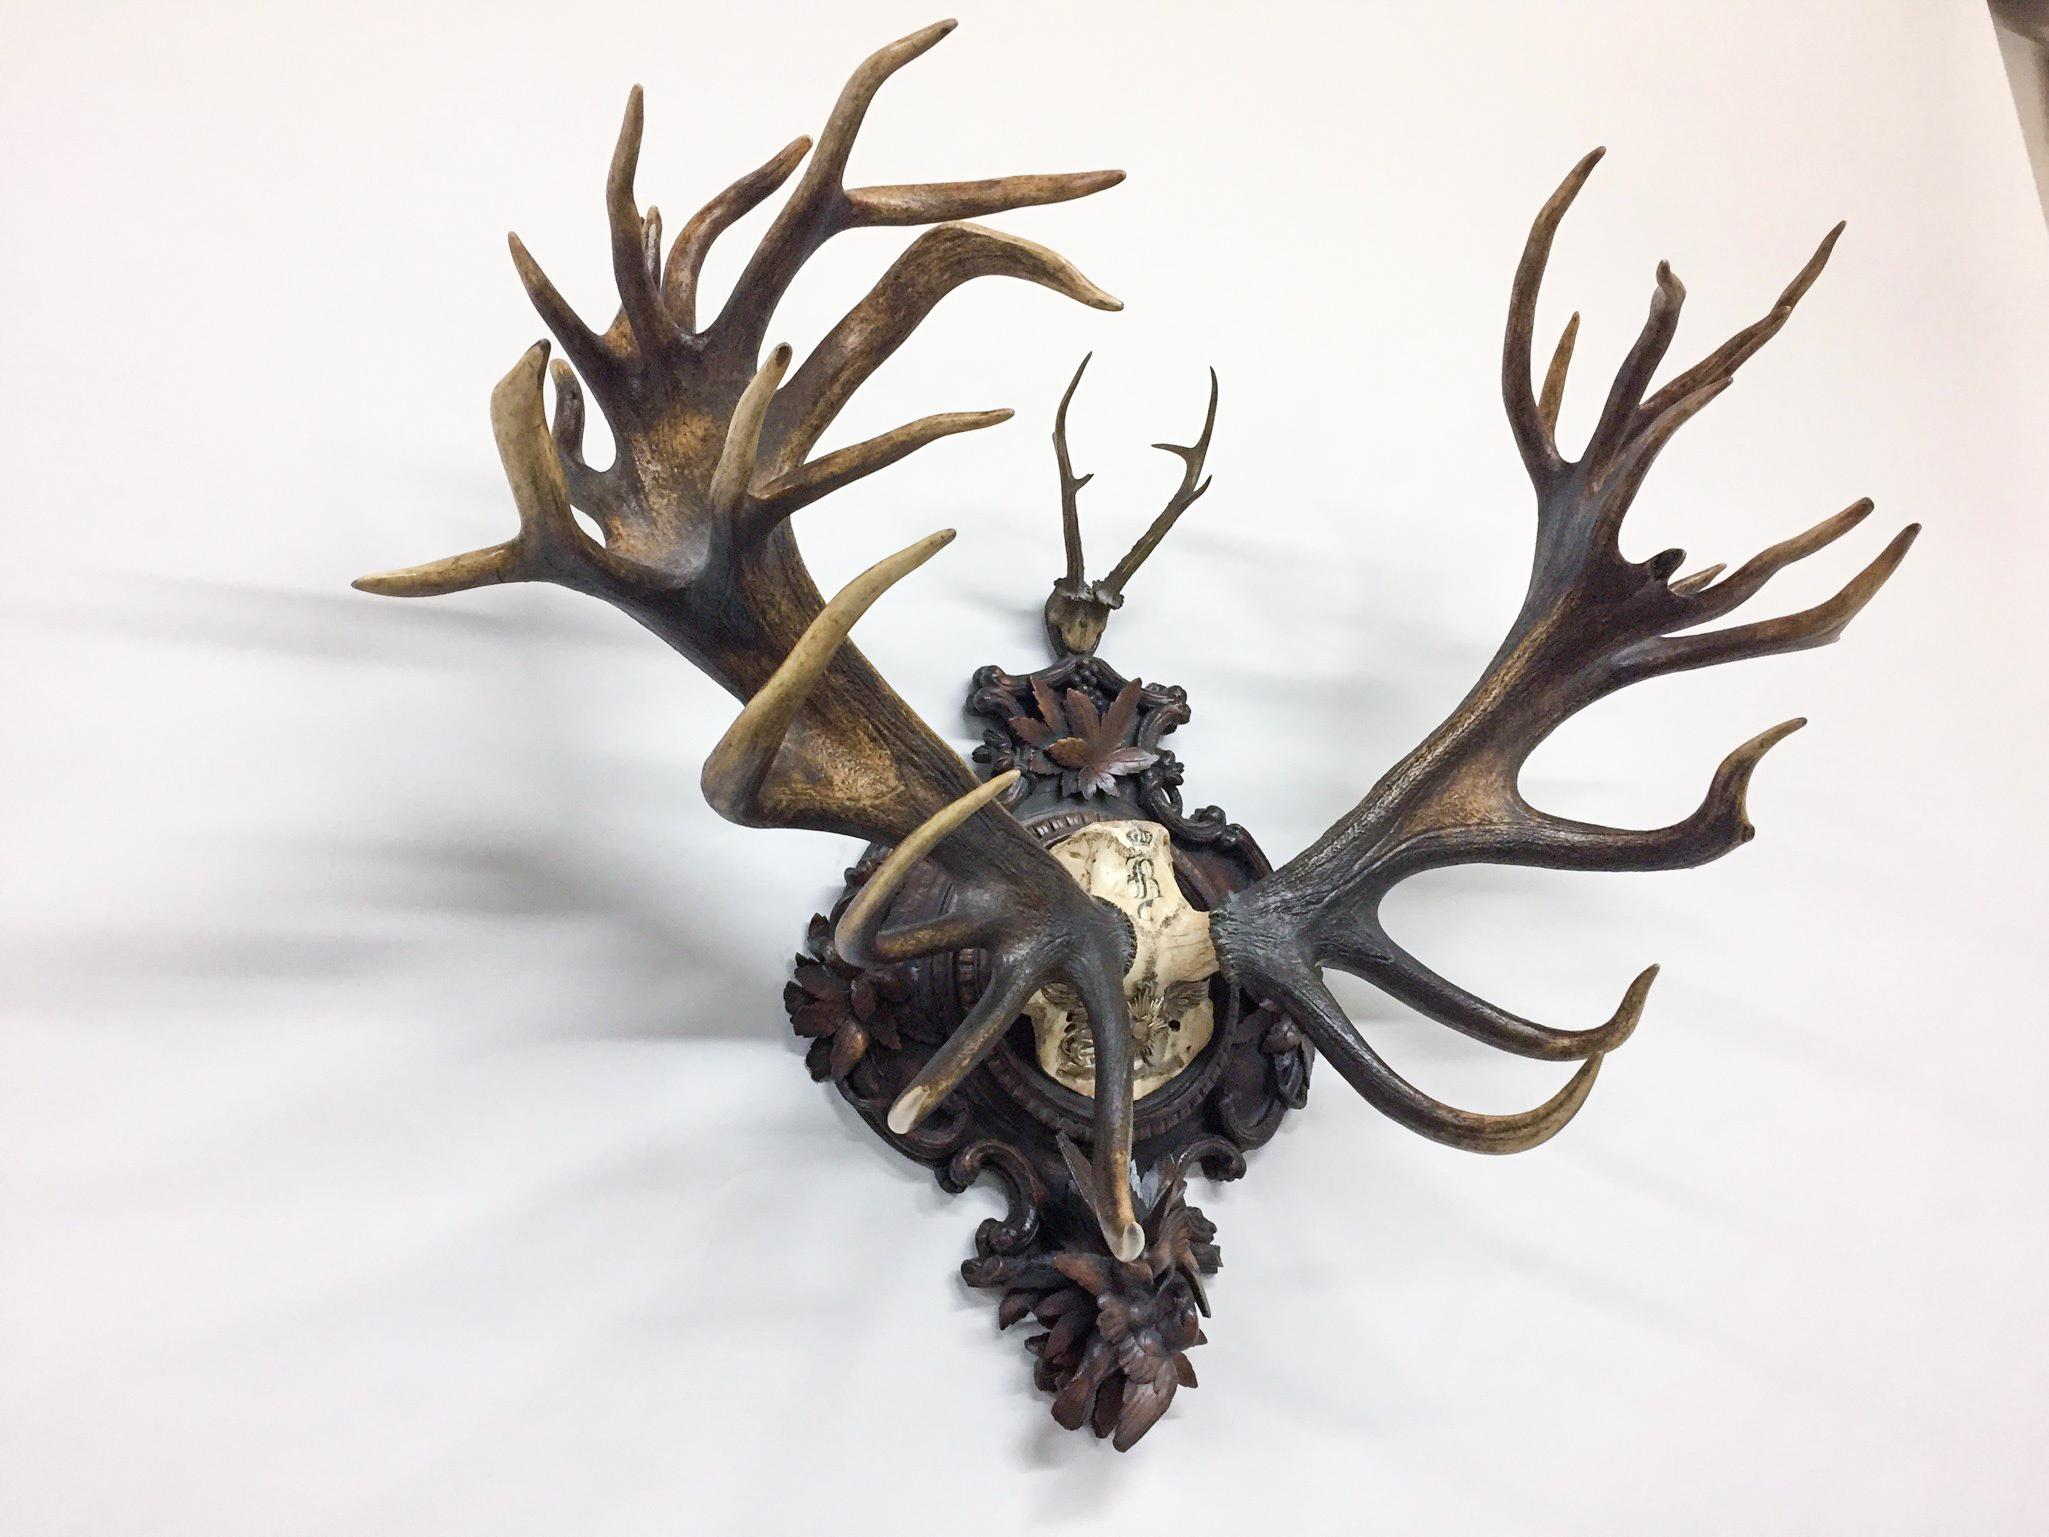 This antique Red Stag trophy is believed to have been taken by one of the Grand Dukes of Baden in the 19th century. The roe deer antlers on the top of the plaque are attached to a hand carved wooden skull. The back plaque features detailed, Black